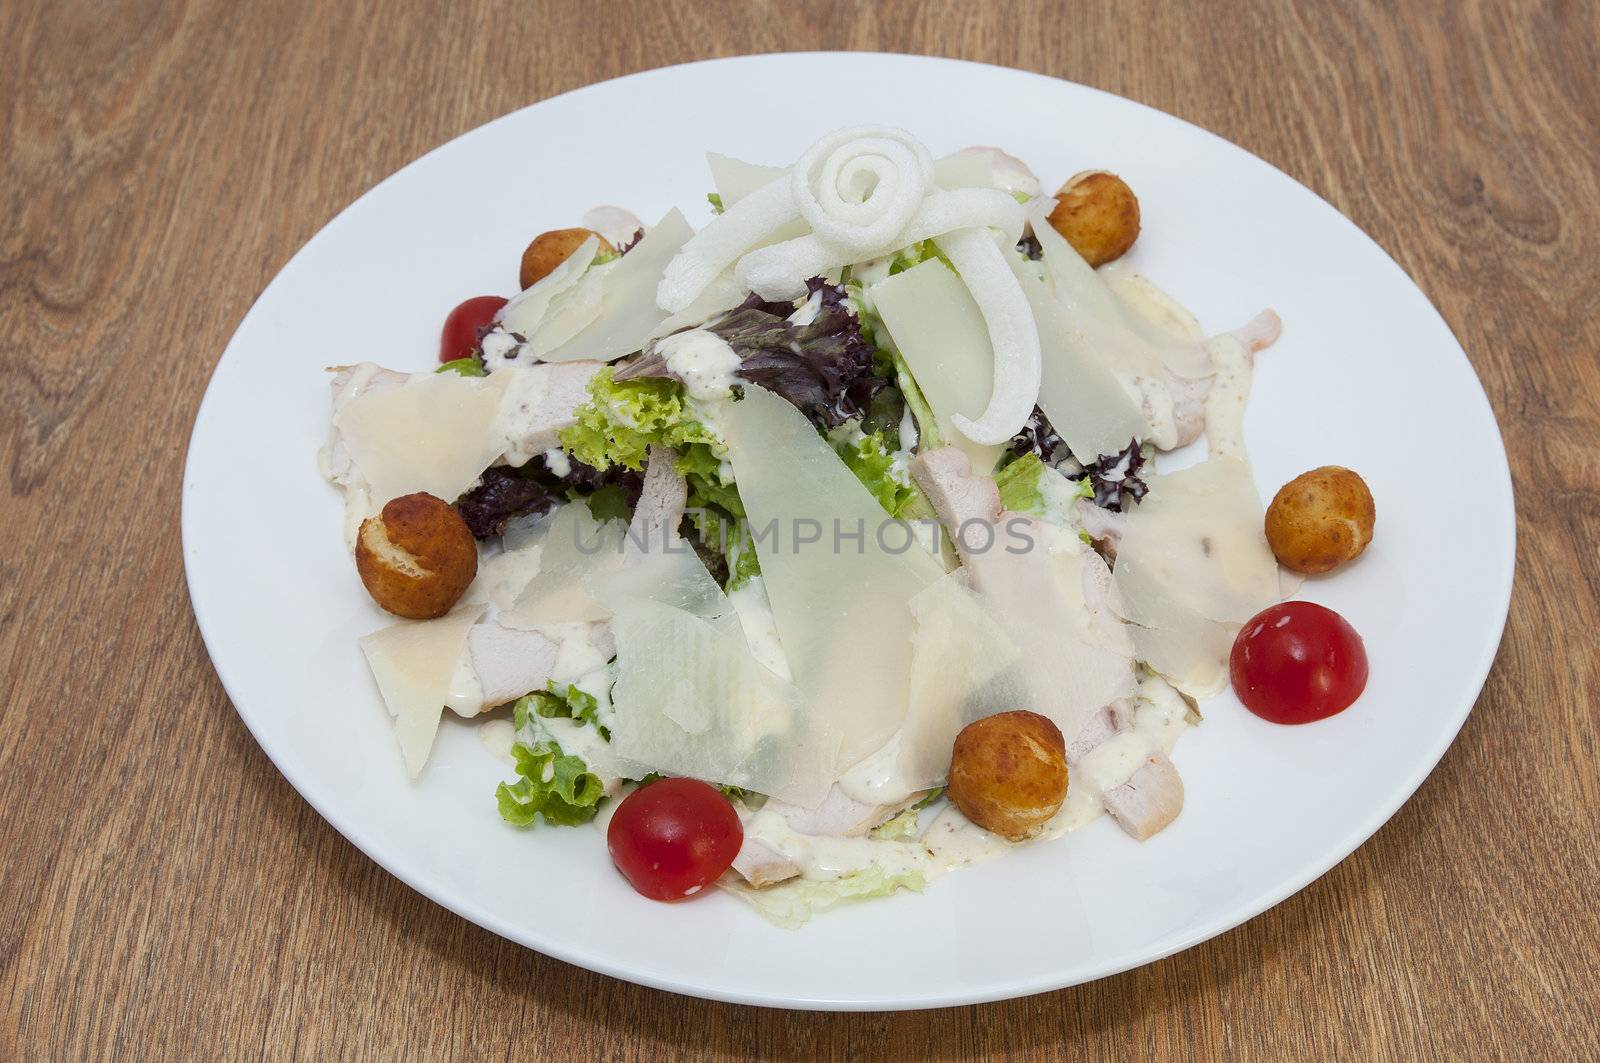 salad with cheese, meat and vegetab by Lester120